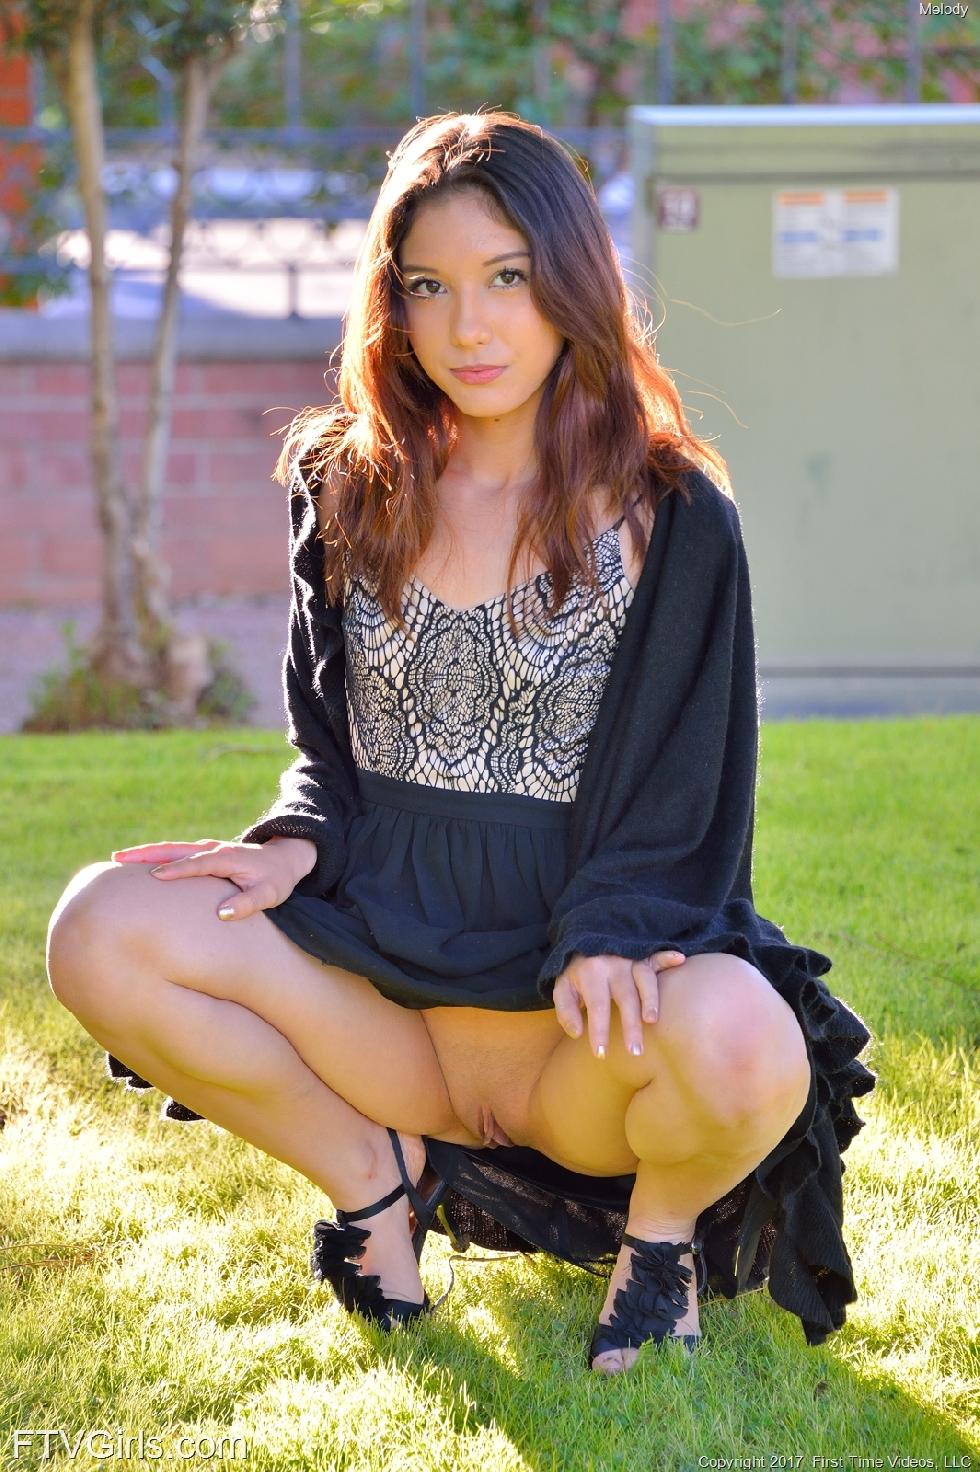 Fantastic girl is posing on the backyard - Melody - 4